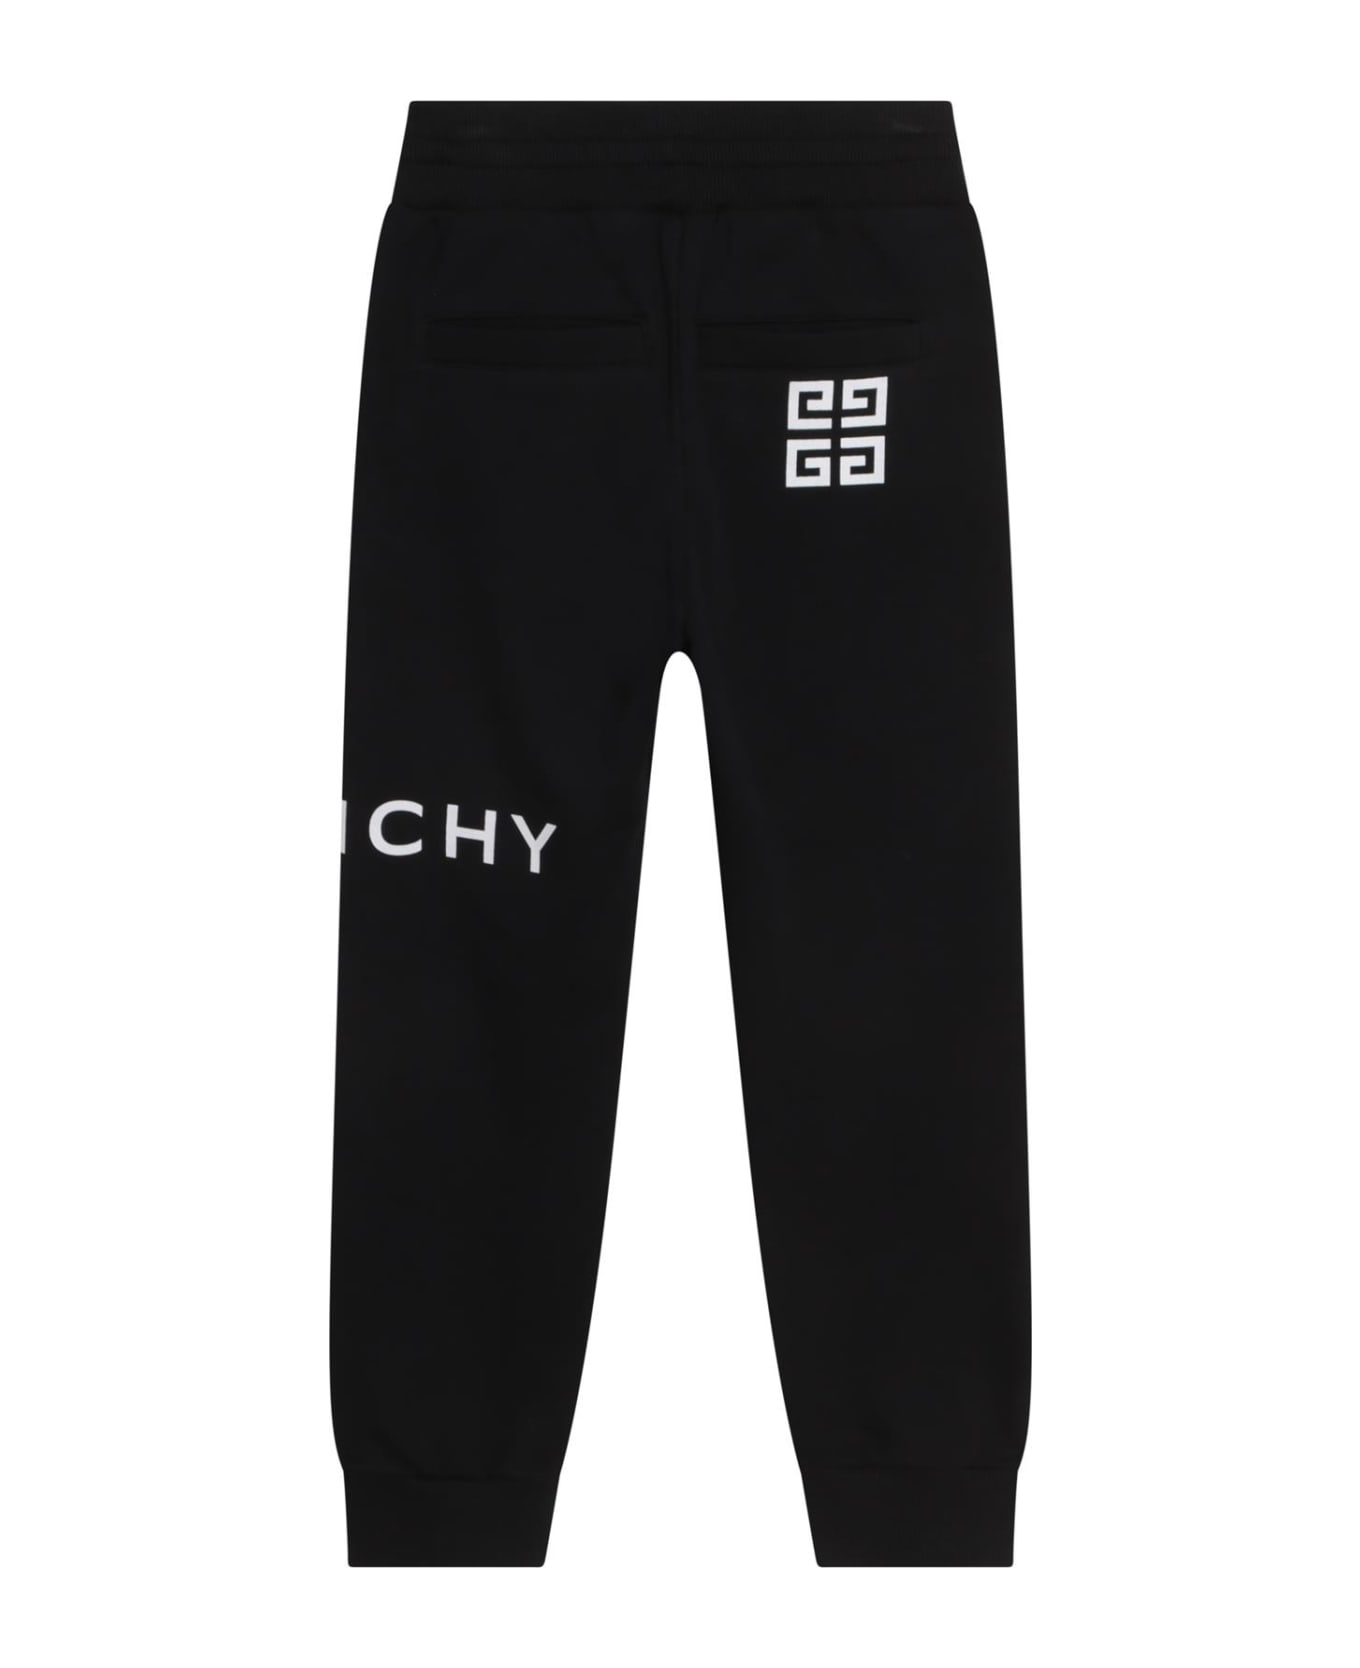 Givenchy Sweatpants With Print - Black